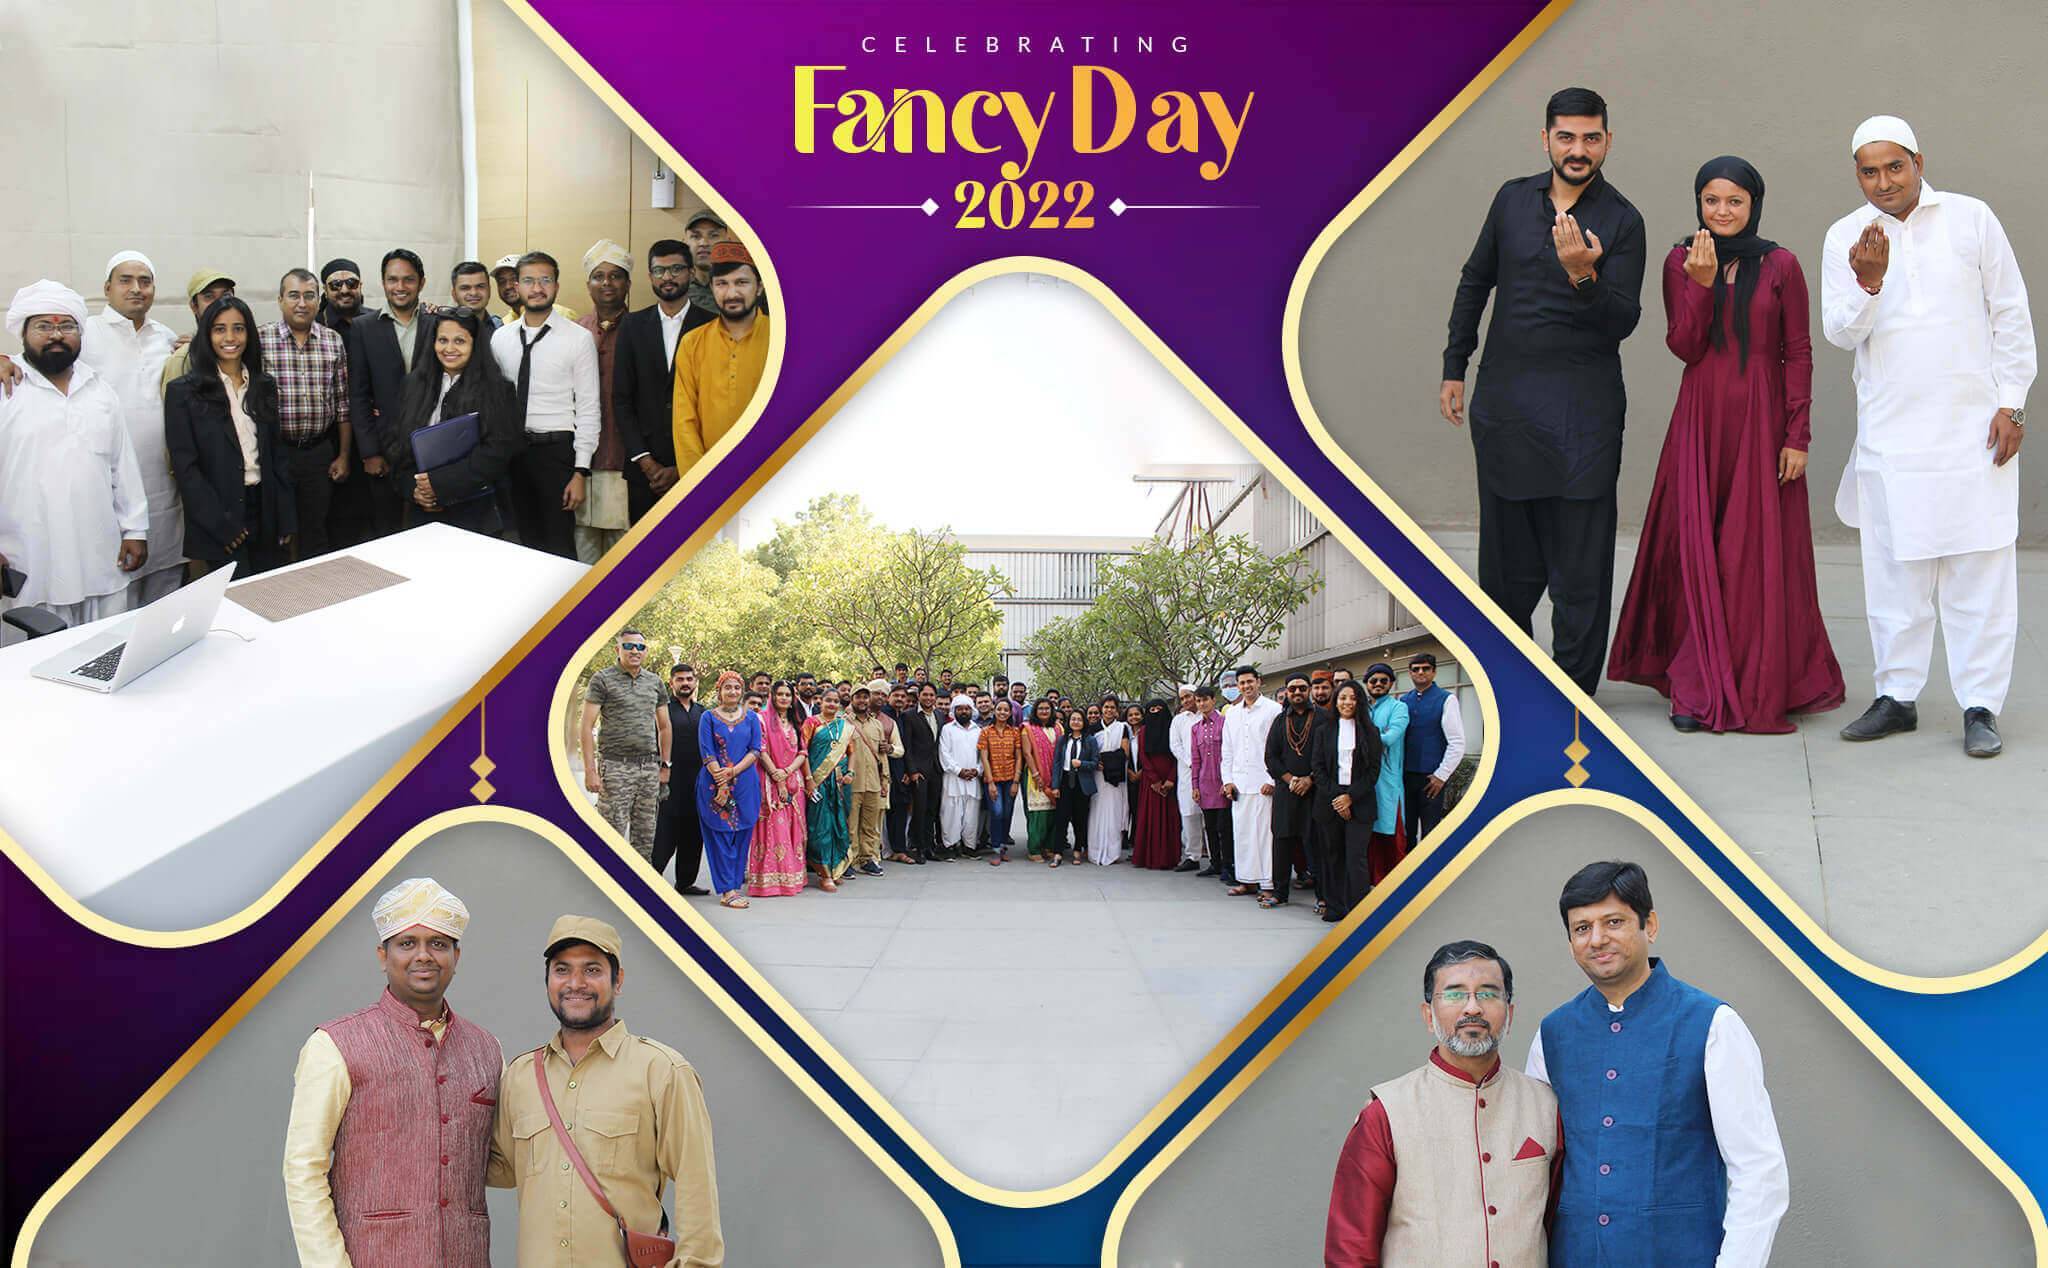 The Fancy Day celebration showed us a glimpse of our rich tradition and diverse culture. Silicon values our heritage and tradition in every celebration.